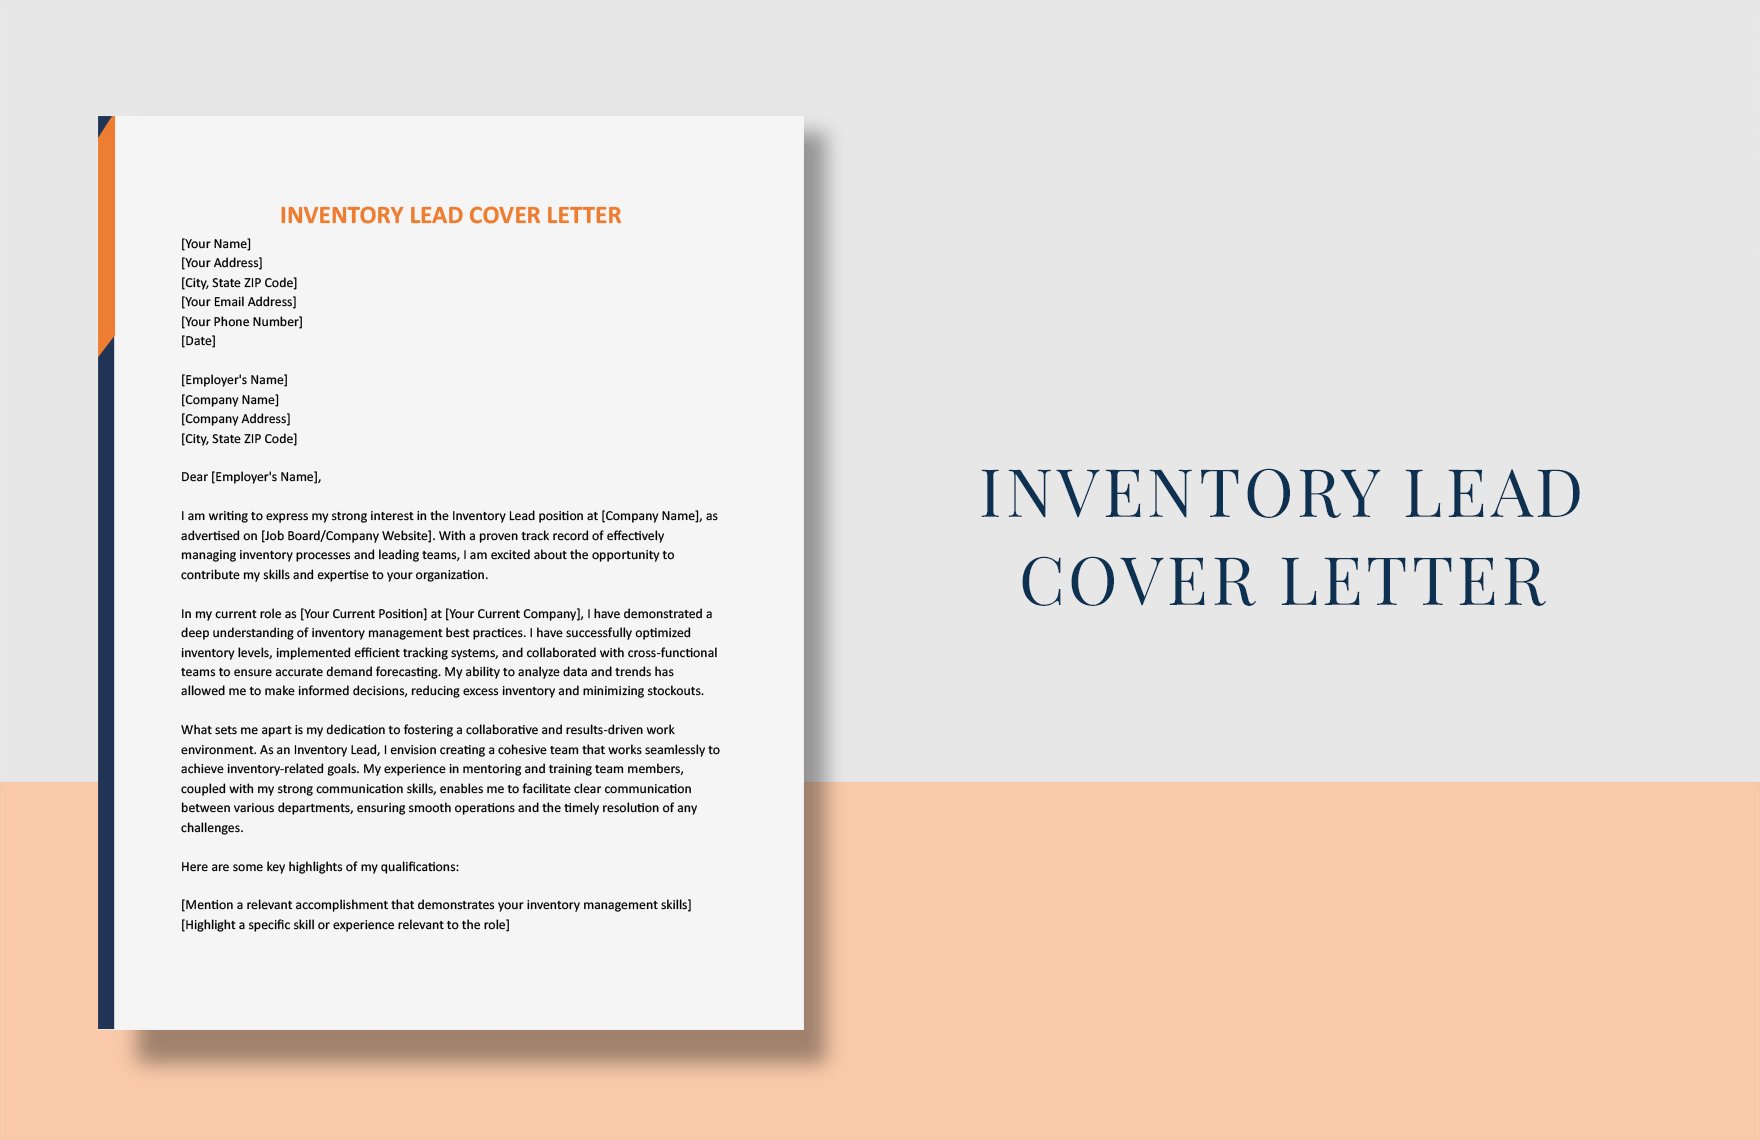 Inventory Lead Cover Letter in Word, Google Docs